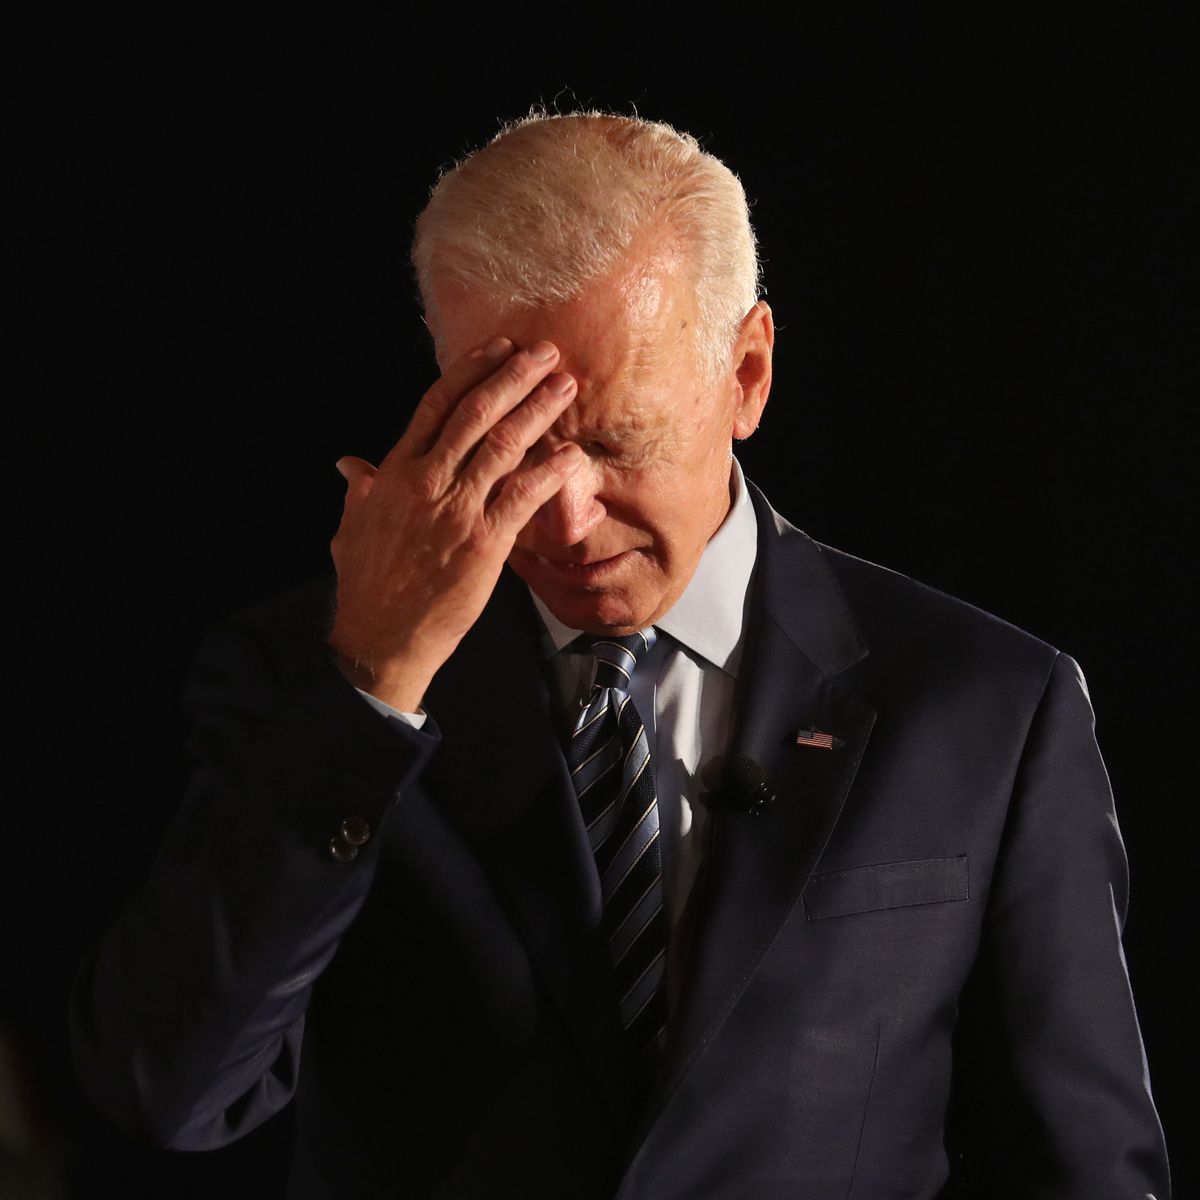 what part did joe biden play in the clarence thomas confirmation for the supreme court? - Biden|President|Joe|Years|Trump|Delaware|Vice|Time|Obama|Senate|States|Law|Age|Campaign|Election|Administration|Family|House|Senator|Office|School|Wife|People|Hunter|University|Act|State|Year|Life|Party|Committee|Children|Beau|Daughter|War|Jill|Day|Facts|Americans|Presidency|Joe Biden|United States|Vice President|White House|Law School|President Trump|Foreign Relations Committee|Donald Trump|President Biden|Presidential Campaign|Presidential Election|Democratic Party|Syracuse University|United Nations|Net Worth|Barack Obama|Judiciary Committee|Neilia Hunter|U.S. Senate|Hillary Clinton|New York Times|Obama Administration|Empty Store Shelves|Systemic Racism|Castle County Council|Archmere Academy|U.S. Senator|Vice Presidency|Second Term|Biden Administration